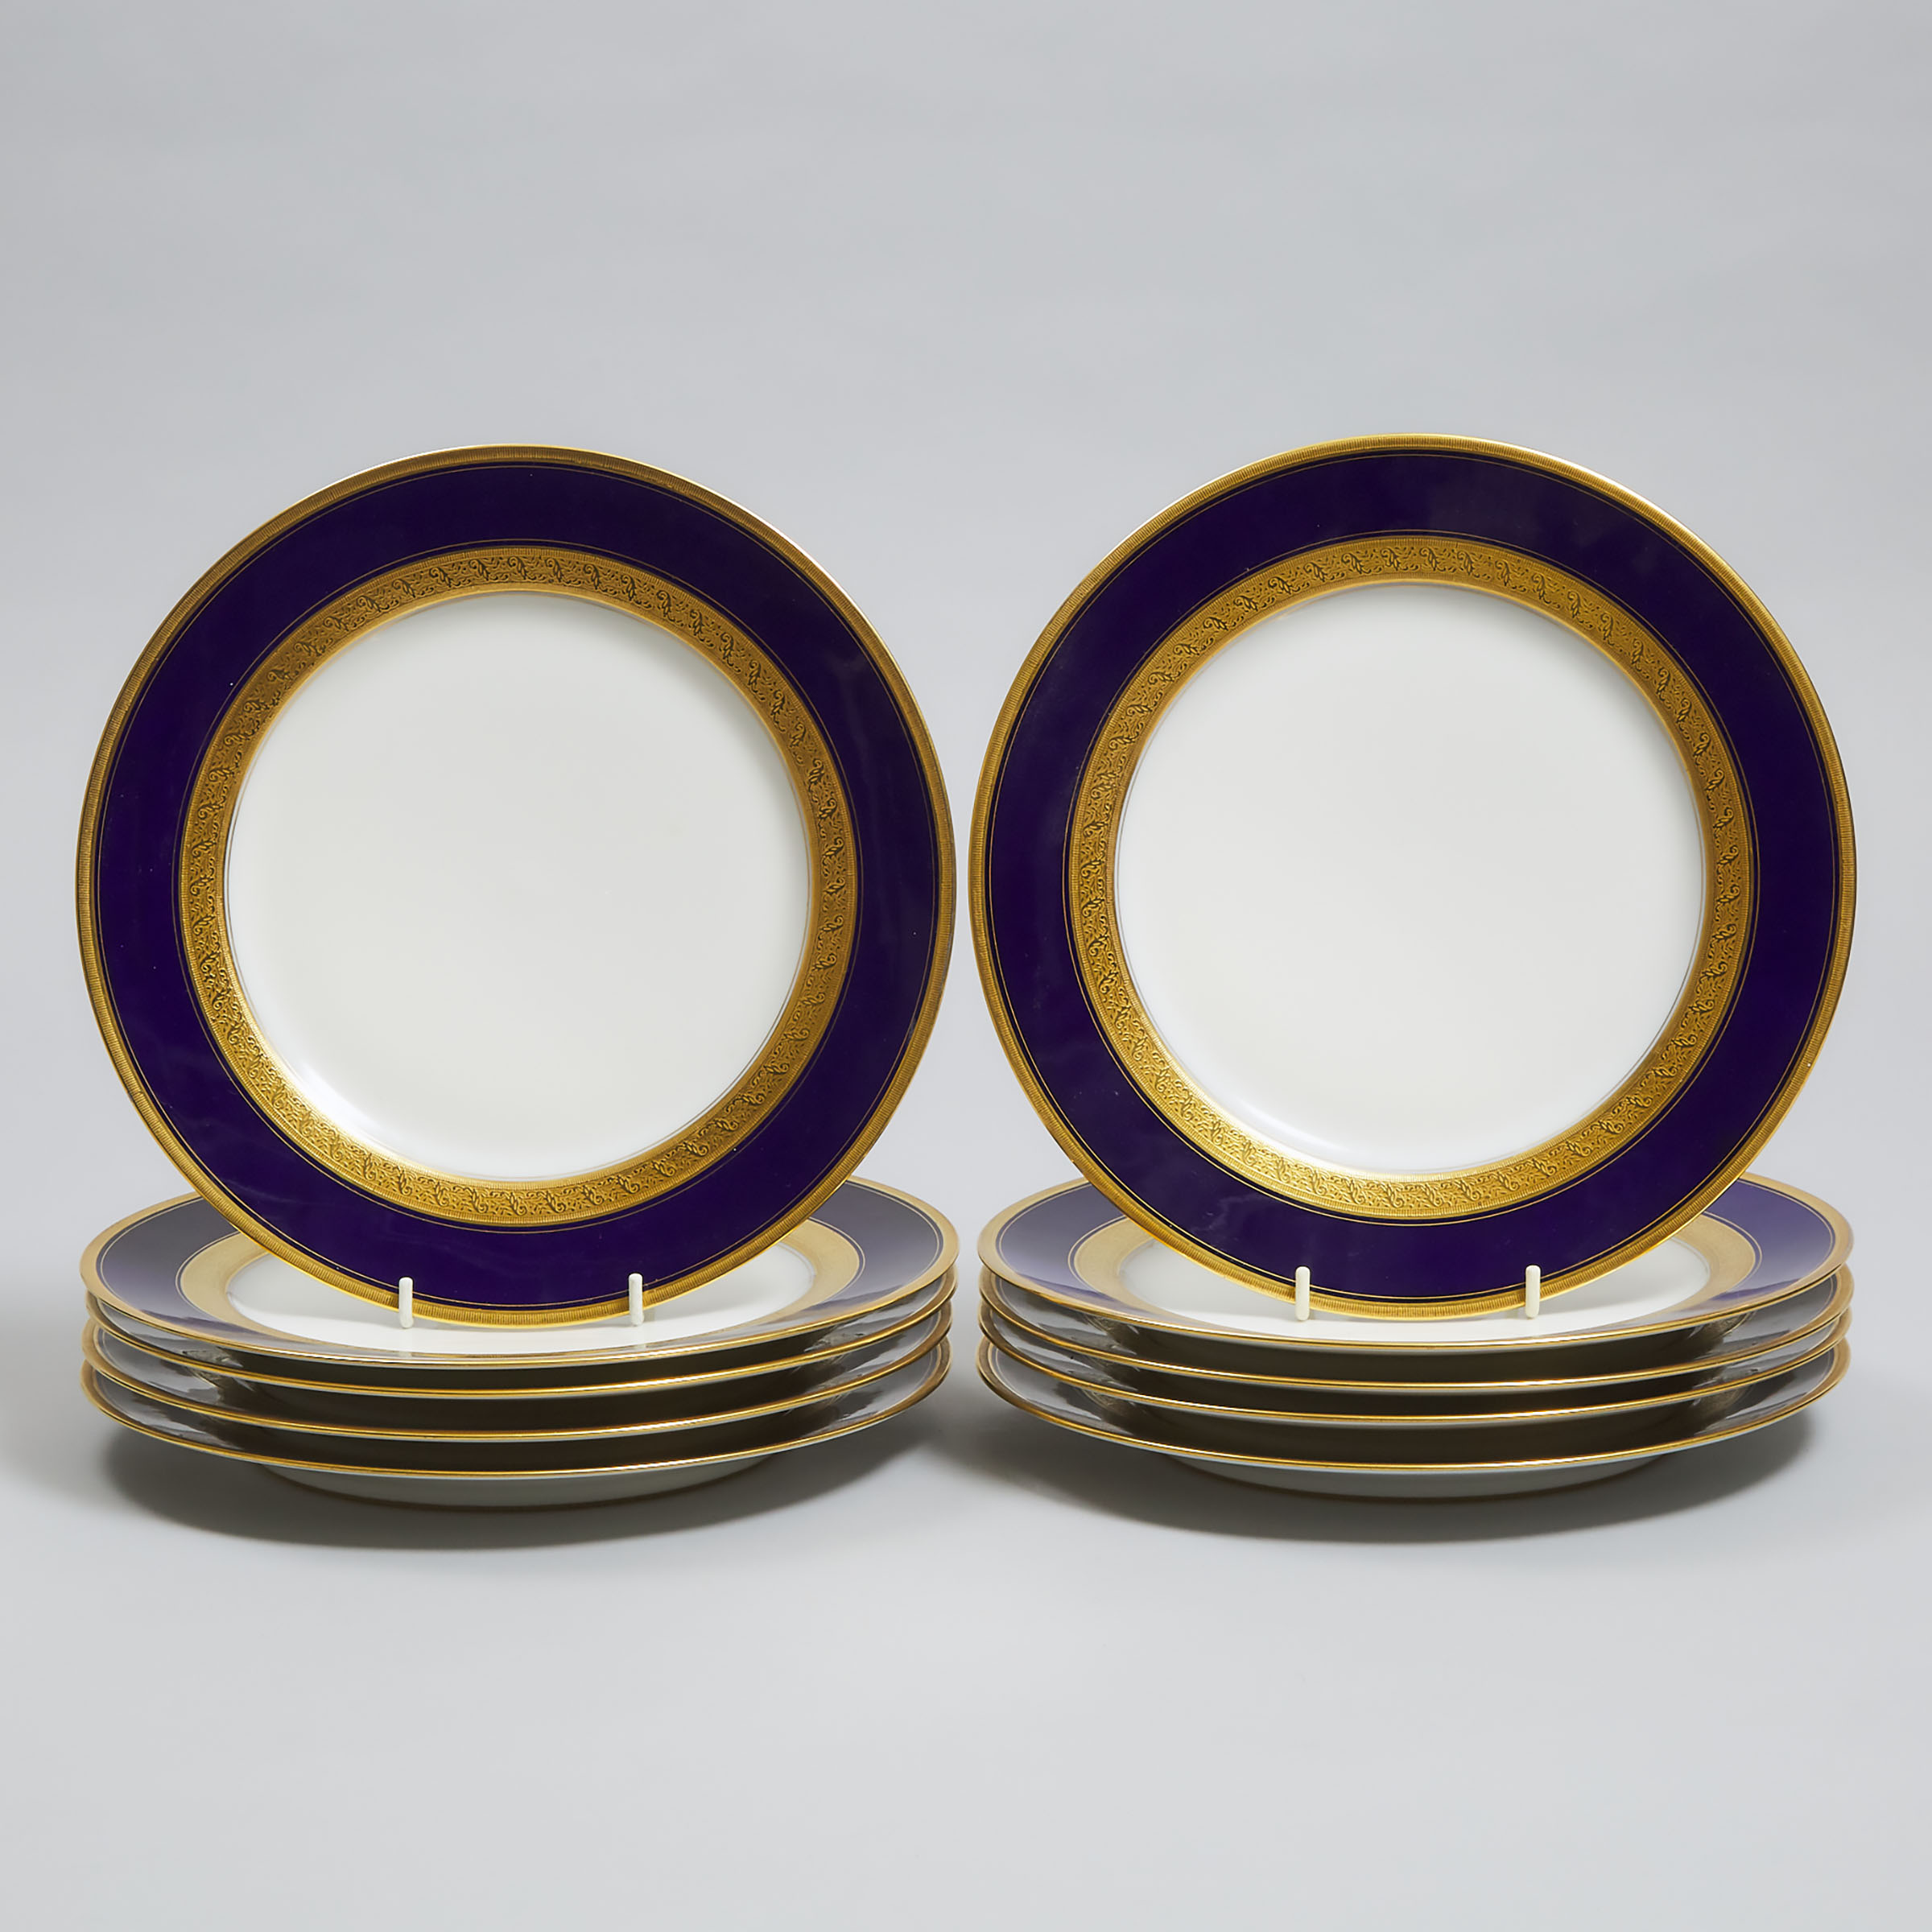 Set of Ten Charles Ahrenfeldt, Limoges Blue and Gilt Banded Service Plates, for William Junor, Toronto & Hamilton, 20th century